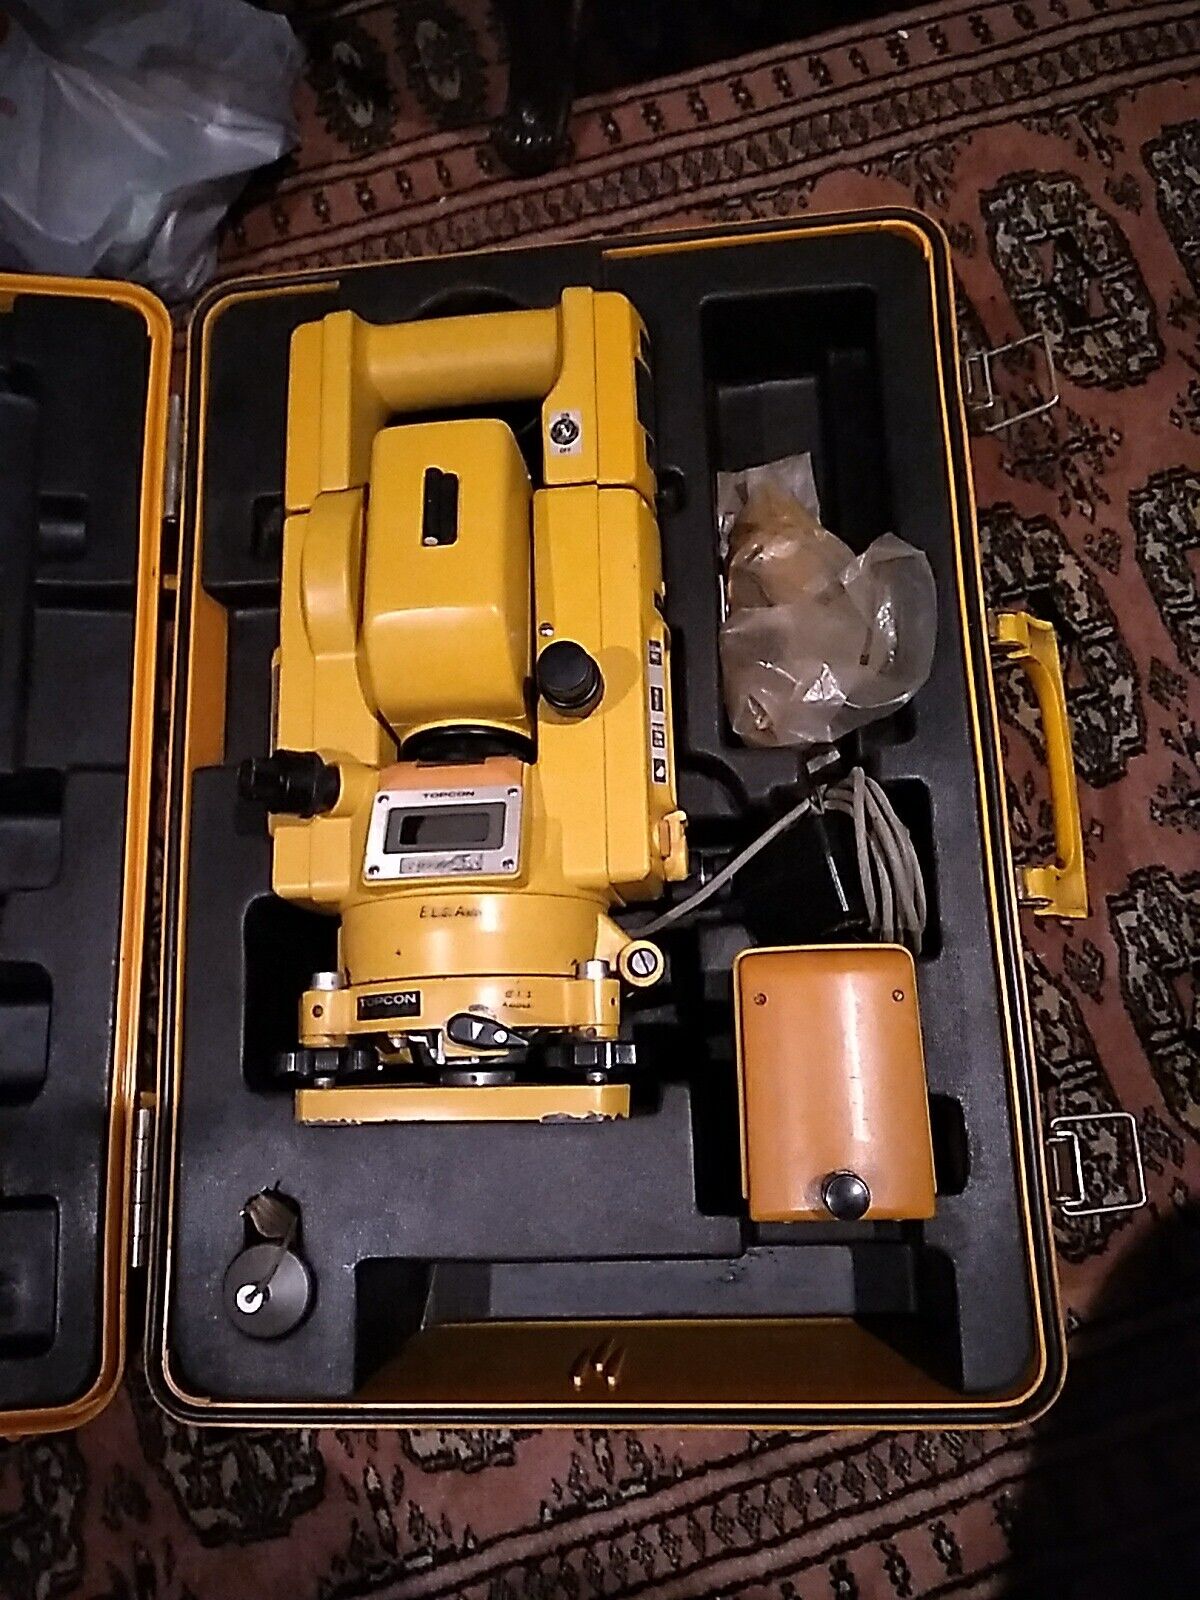 Topcon  GTS-3 Total Station Untested but turns on